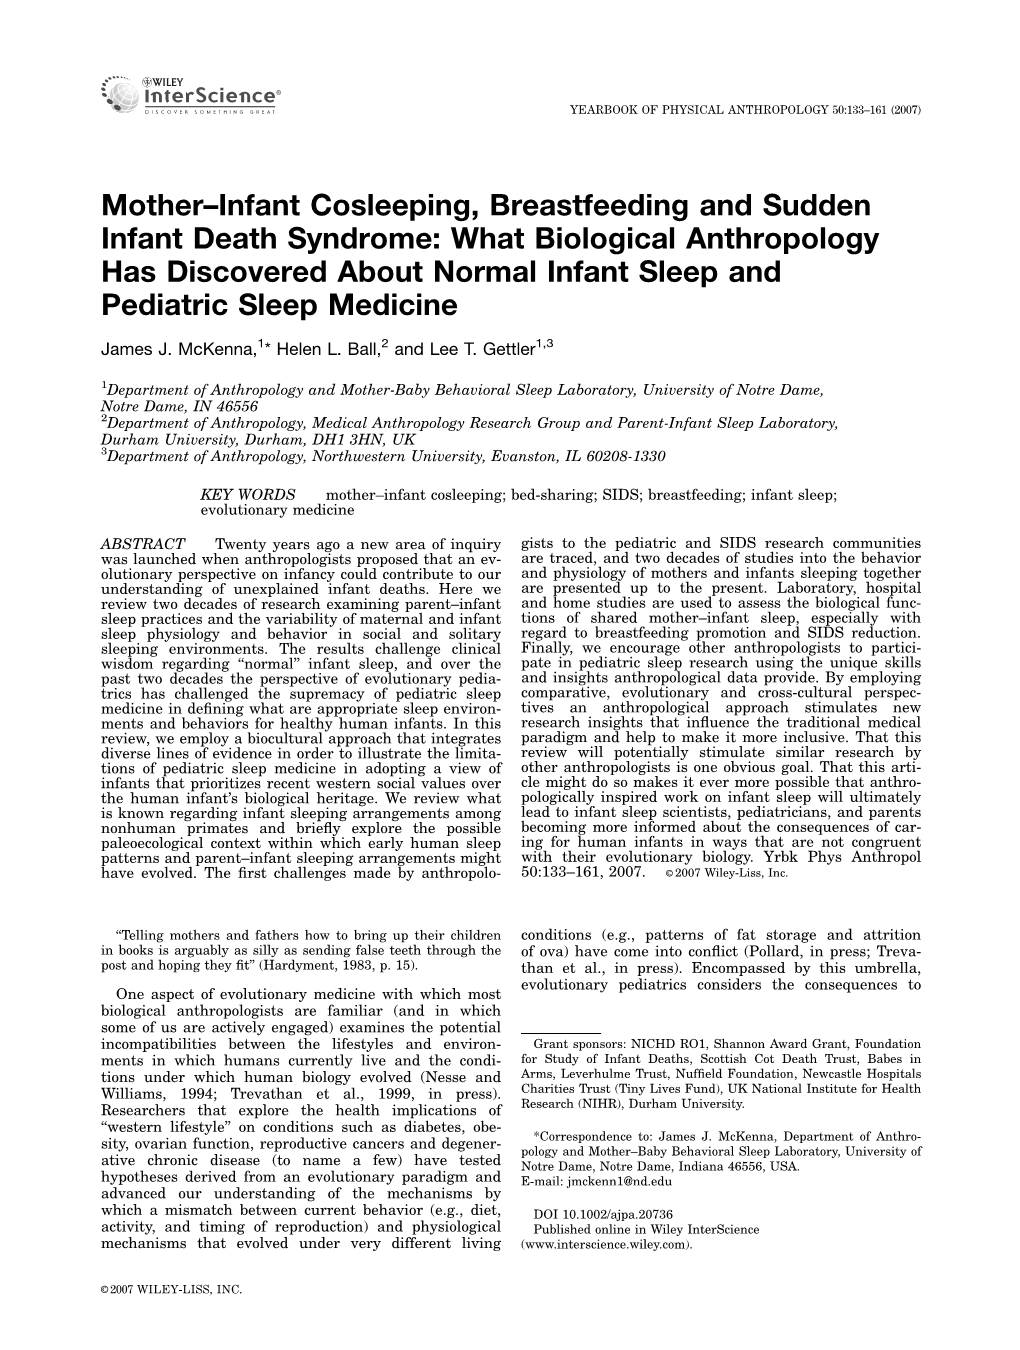 Mother-Infant Cosleeping, Breastfeeding and SIDS